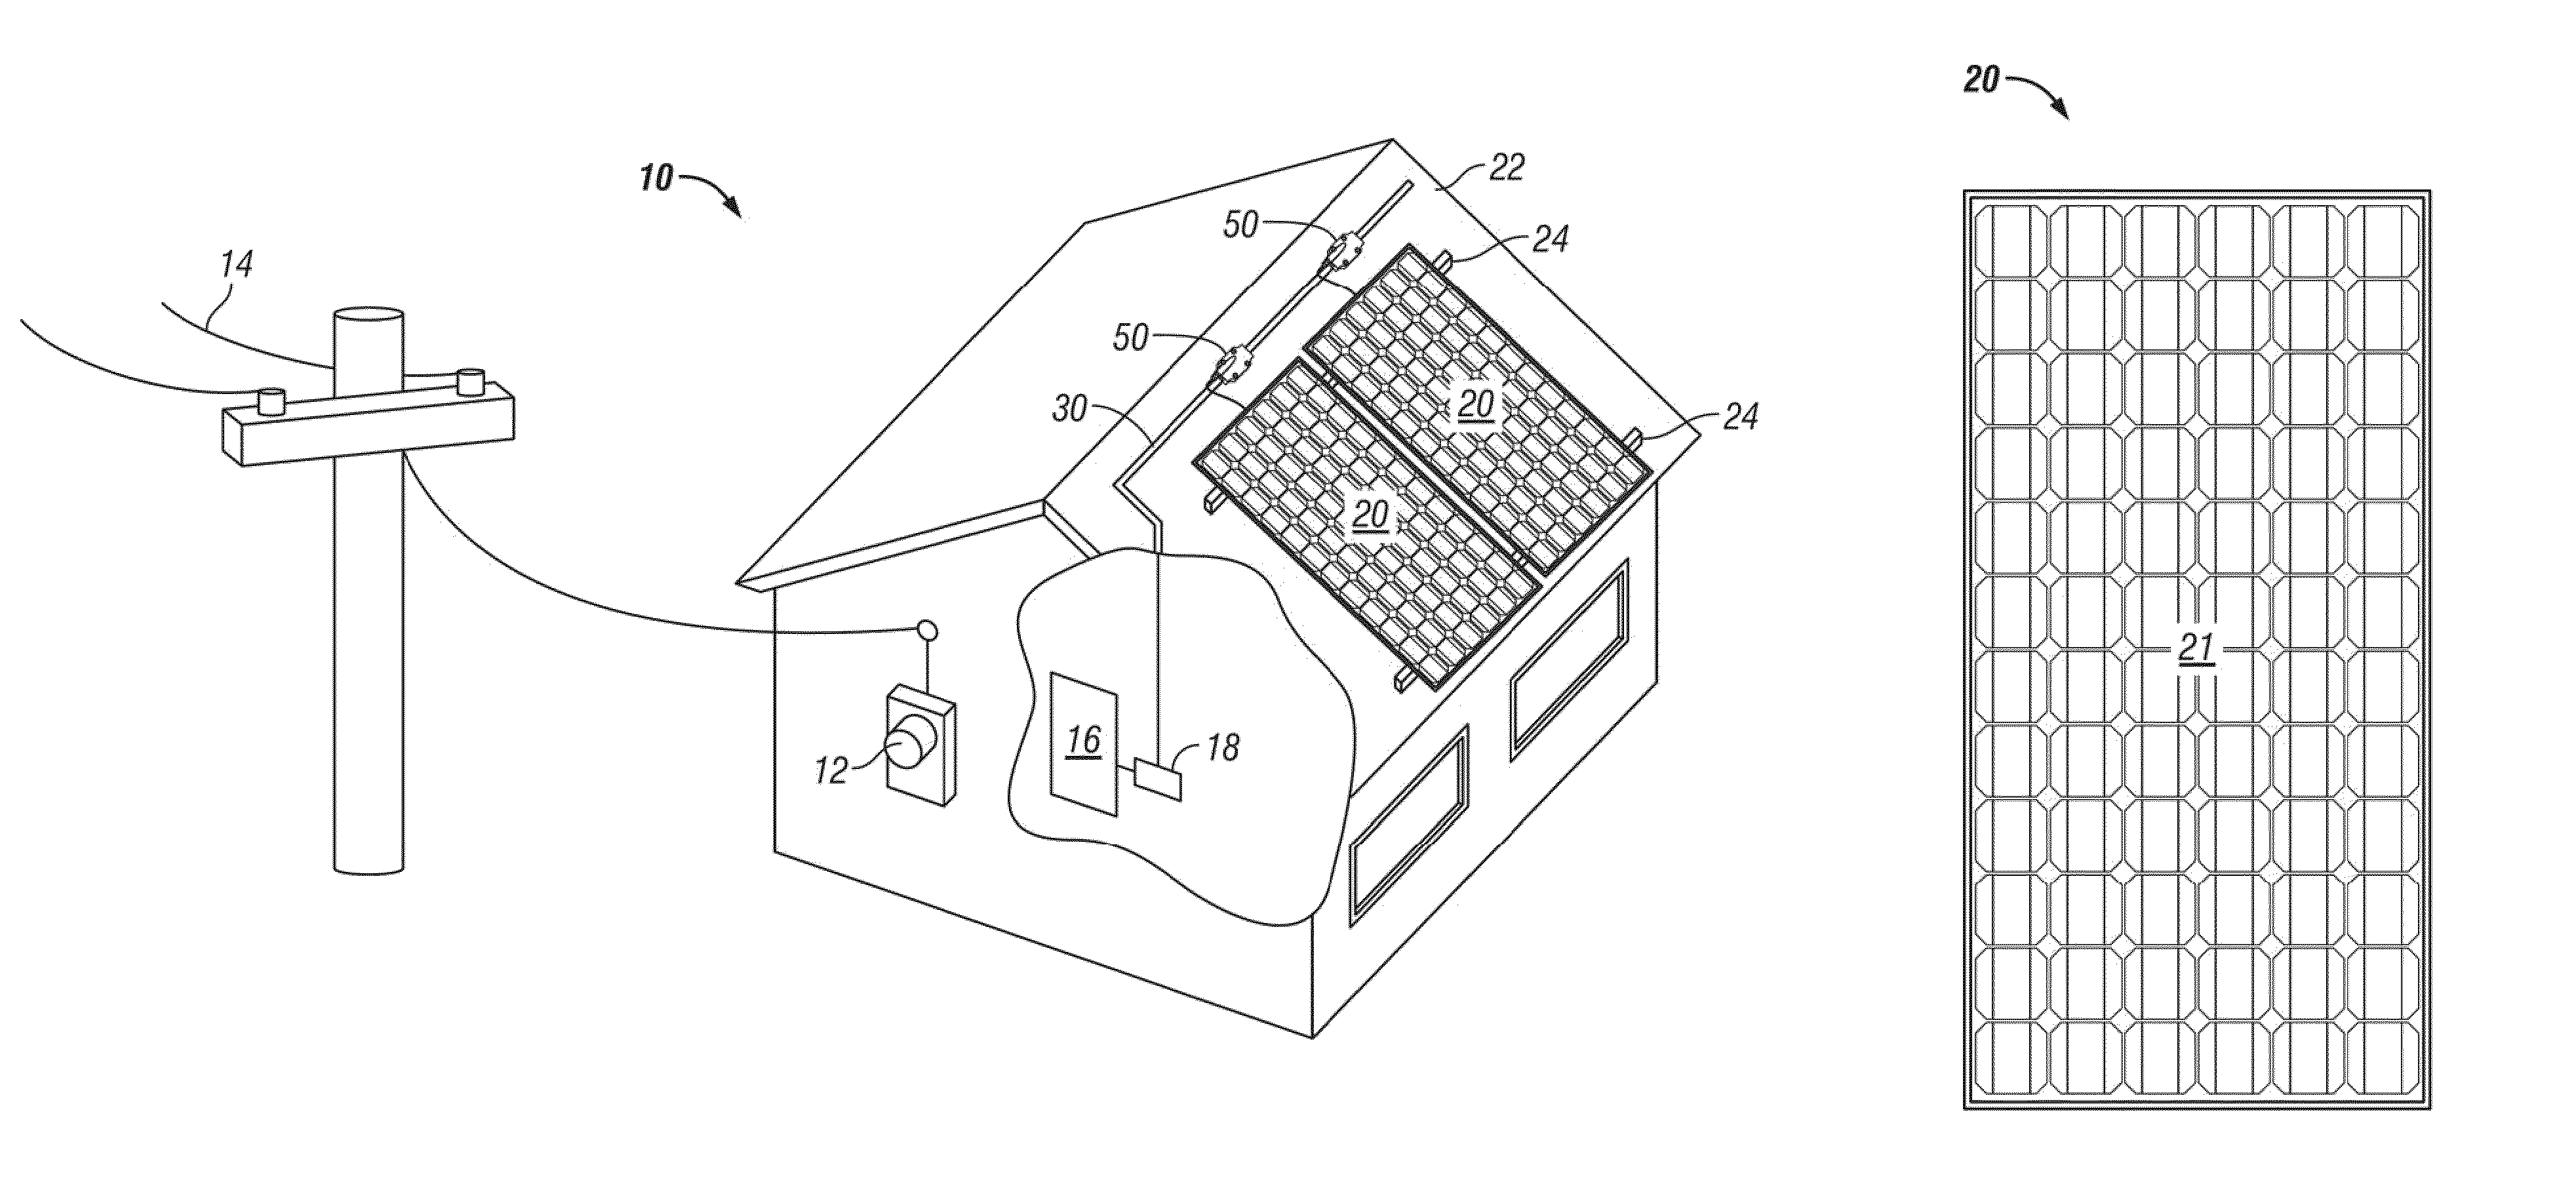 Connector with conductor piercing prongs for a solar panel